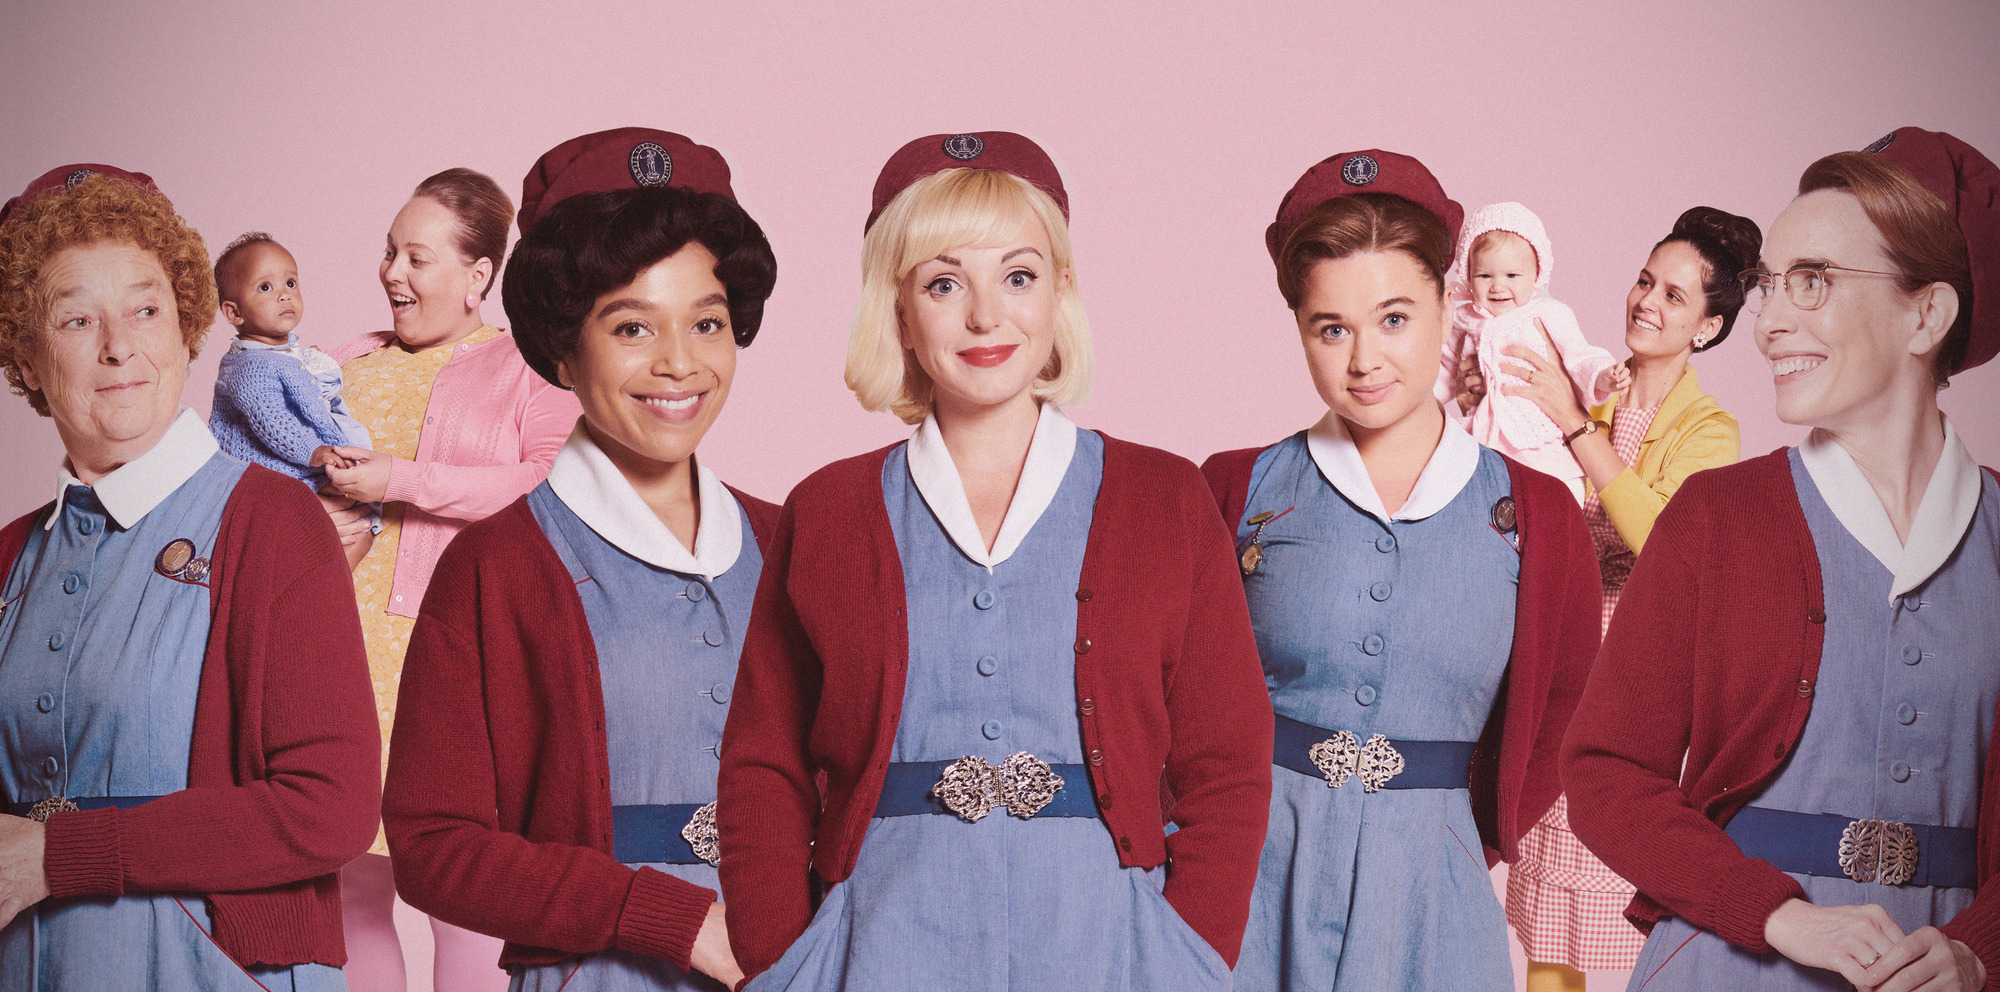 Call the Midwife Season 11: air date, cast, plot, trailer | What to Watch